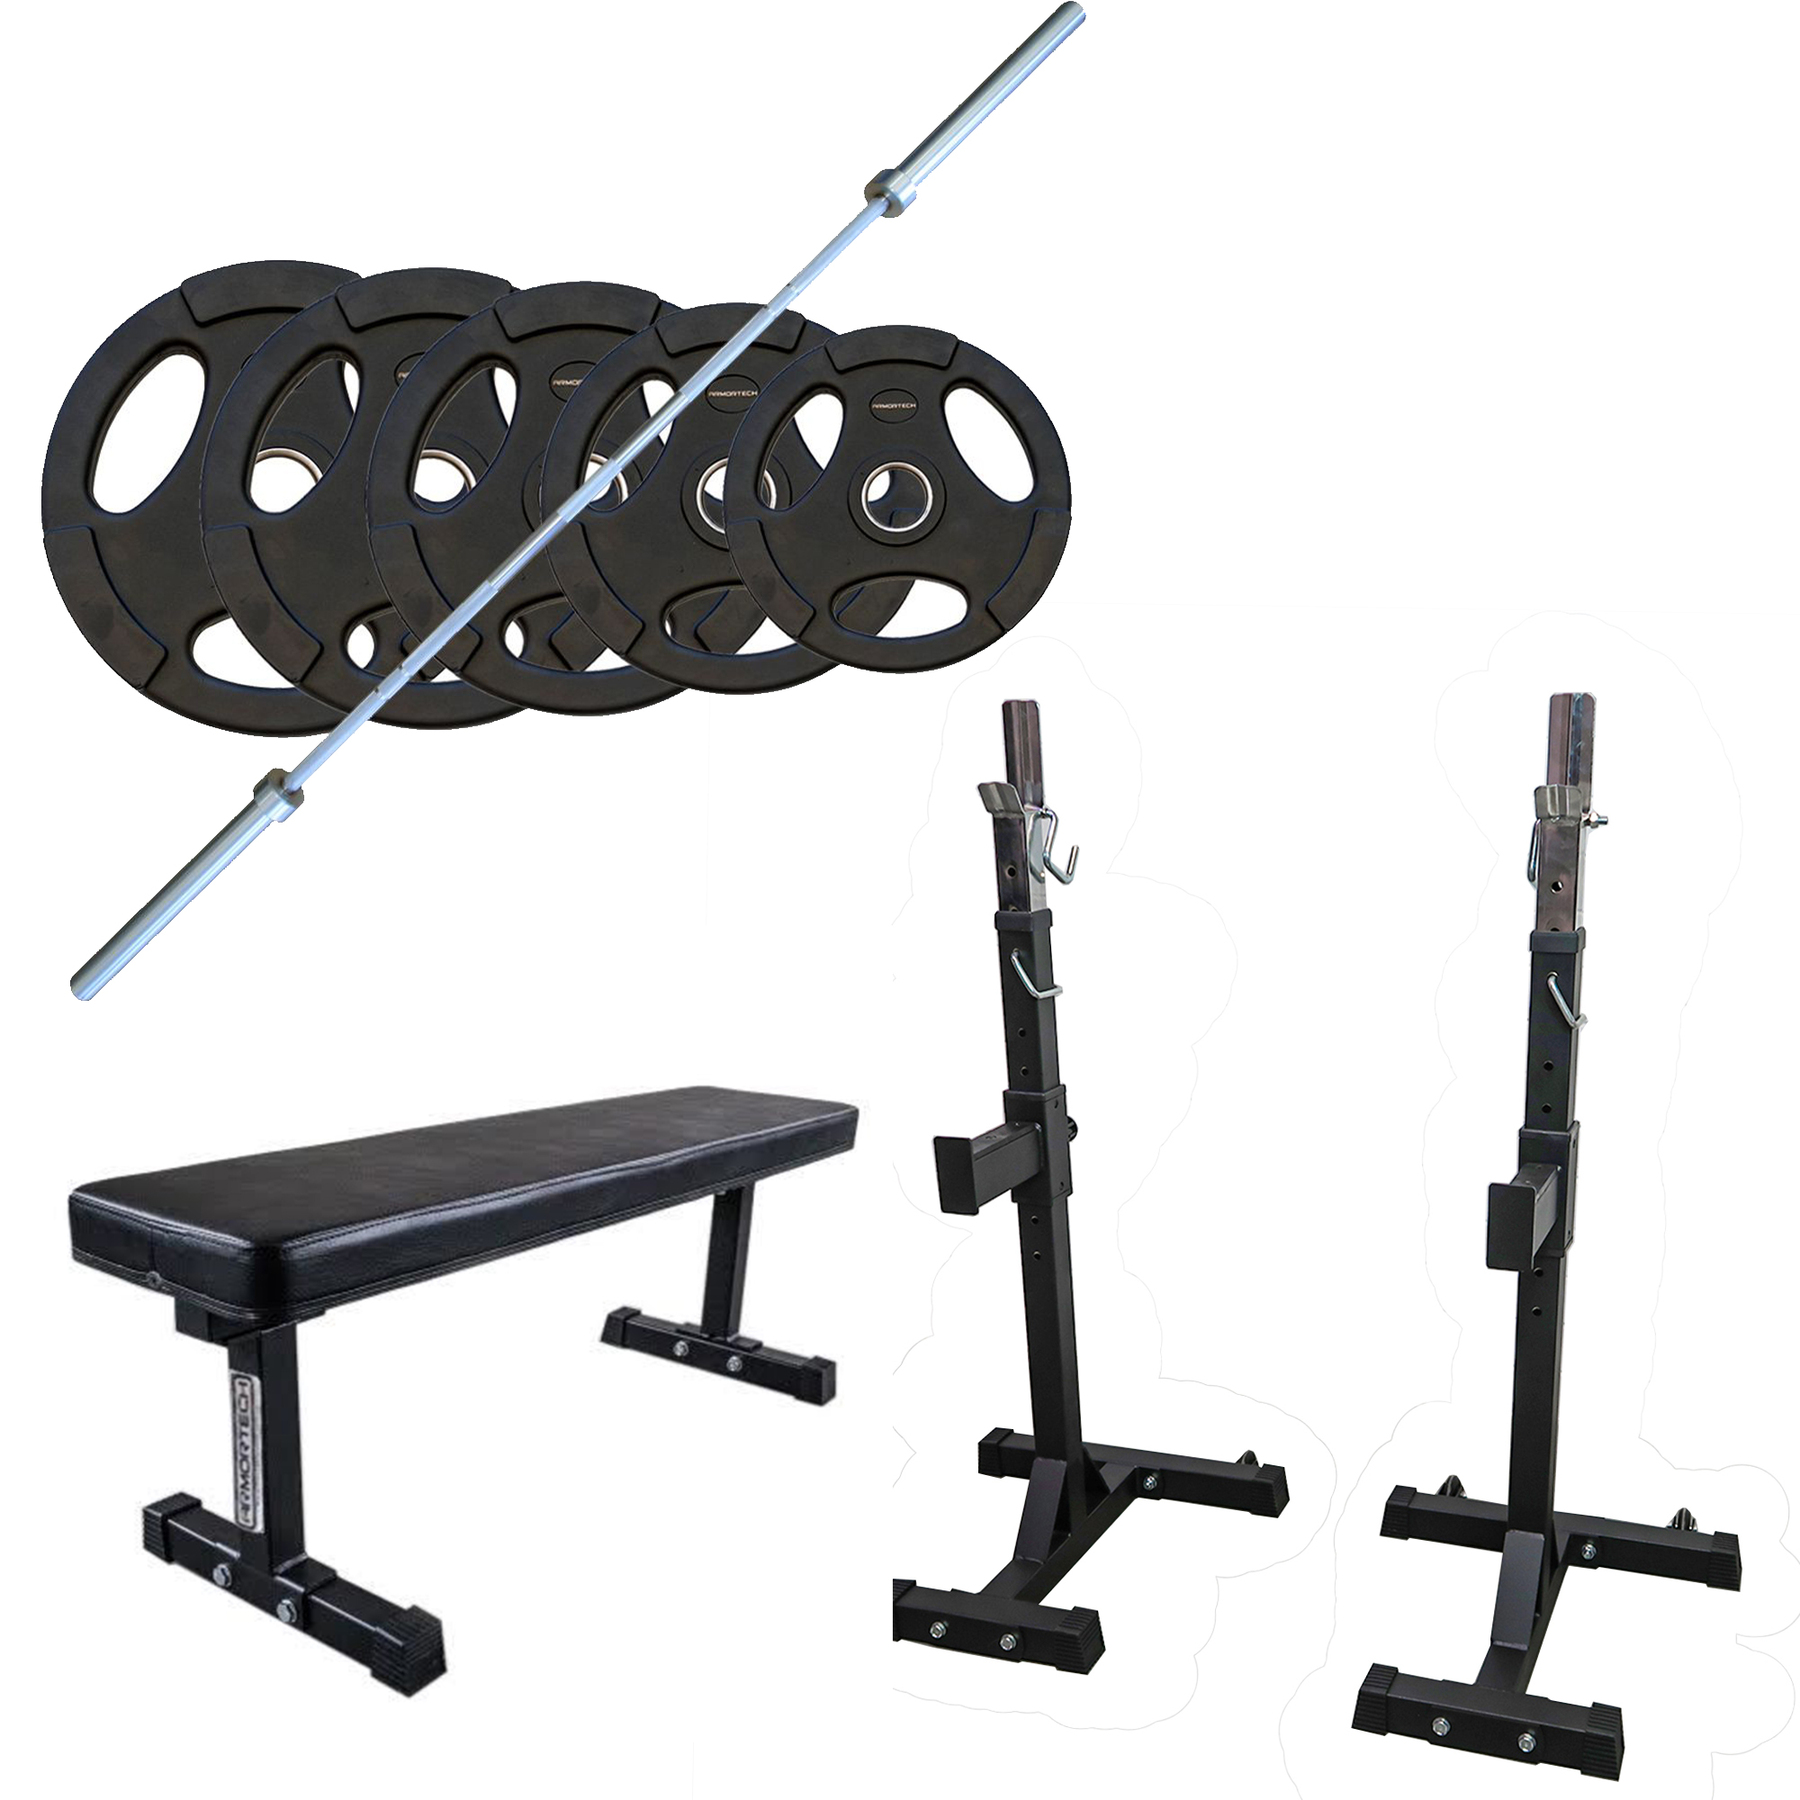 Bench Press Package, with 100KG Olympic Rubber Plates & Barbell